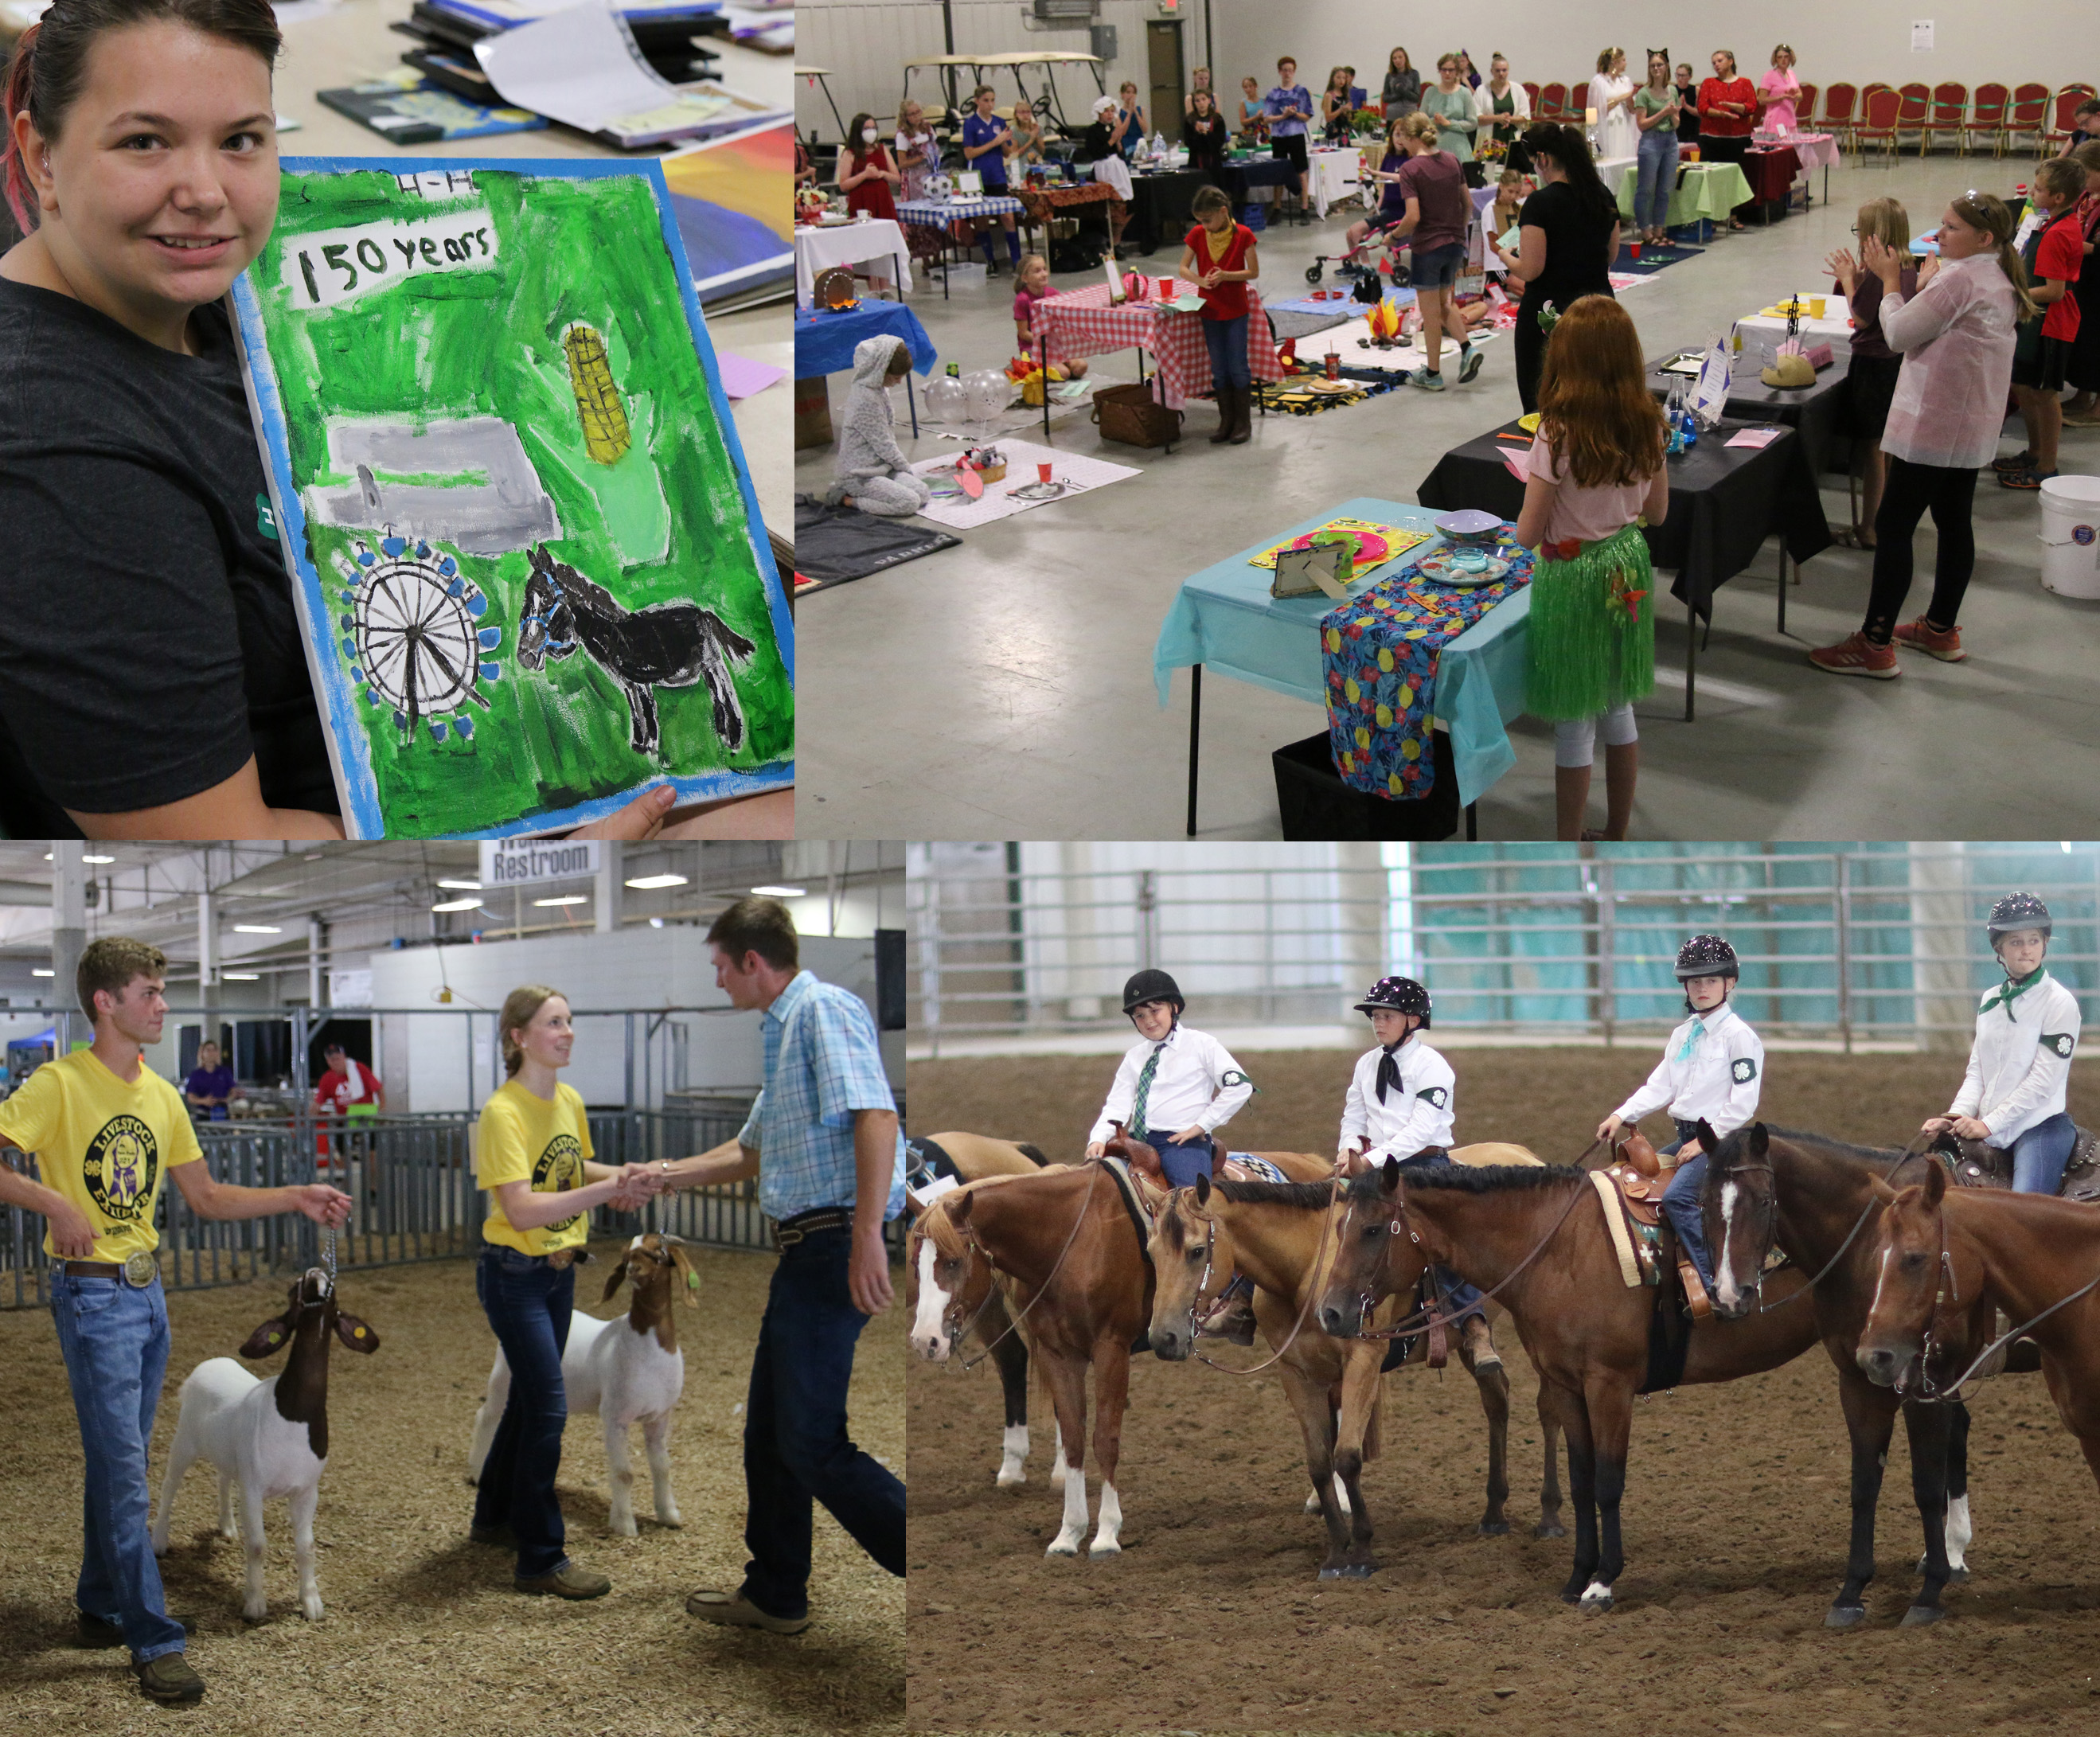 Clockwise from top left: a 4-H member holding her 150th anniversary-themed painting, 4-H Table Setting contest, one of the 4-H Horse Western shows, and the Meat Goat show.